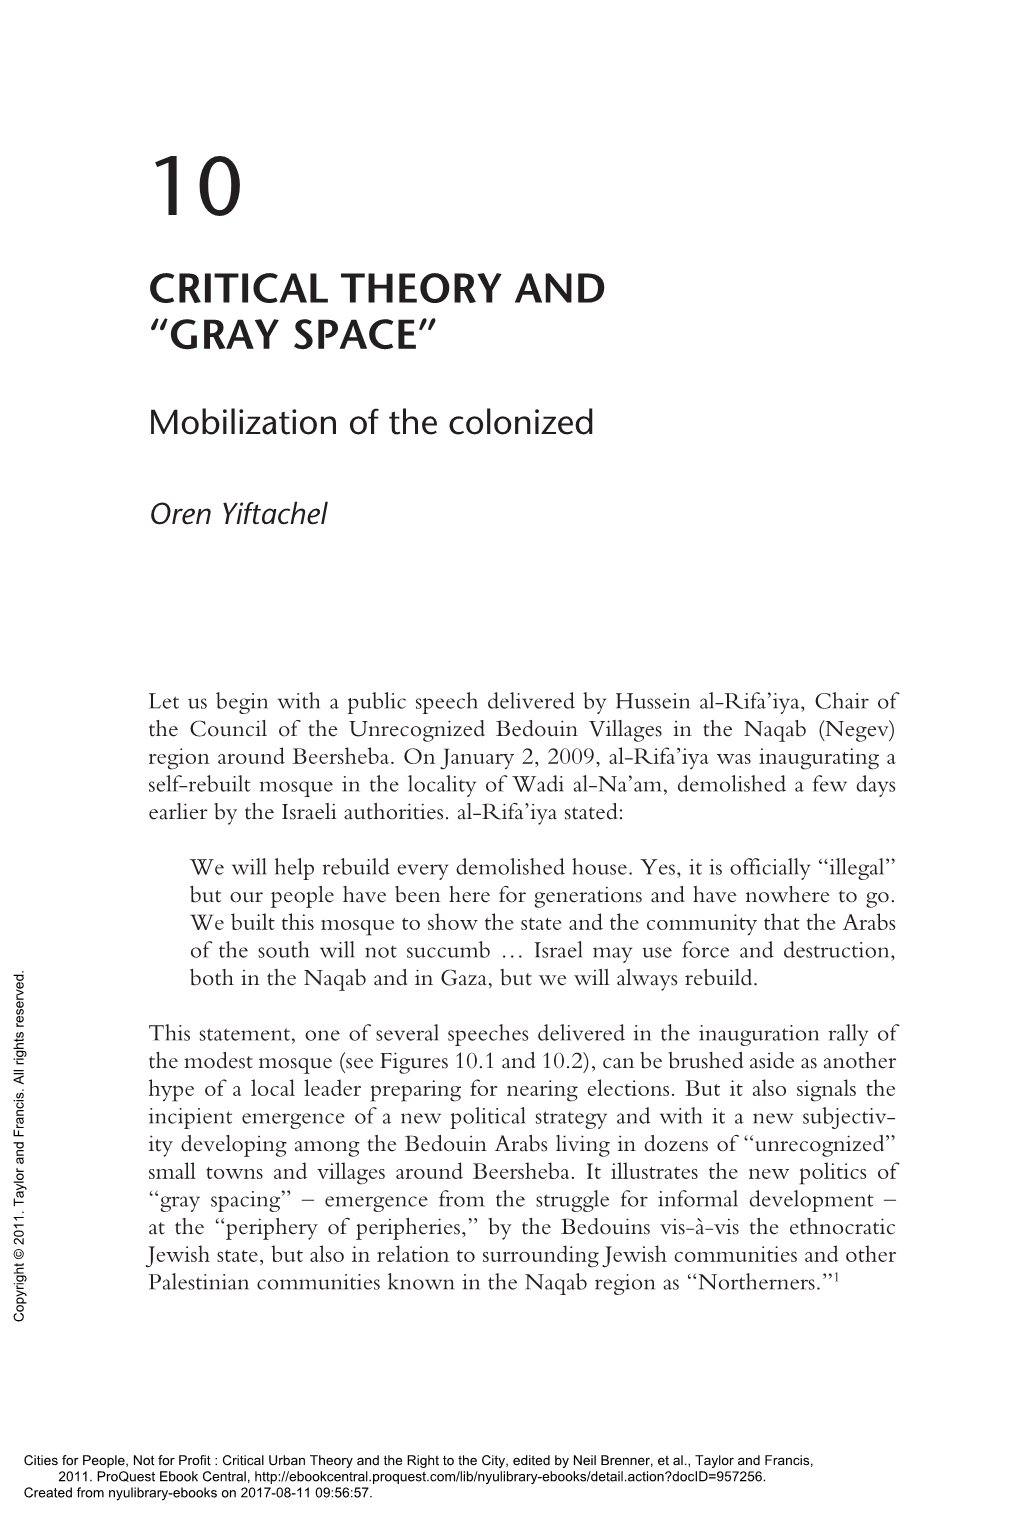 Critical Theory and “Gray Space”